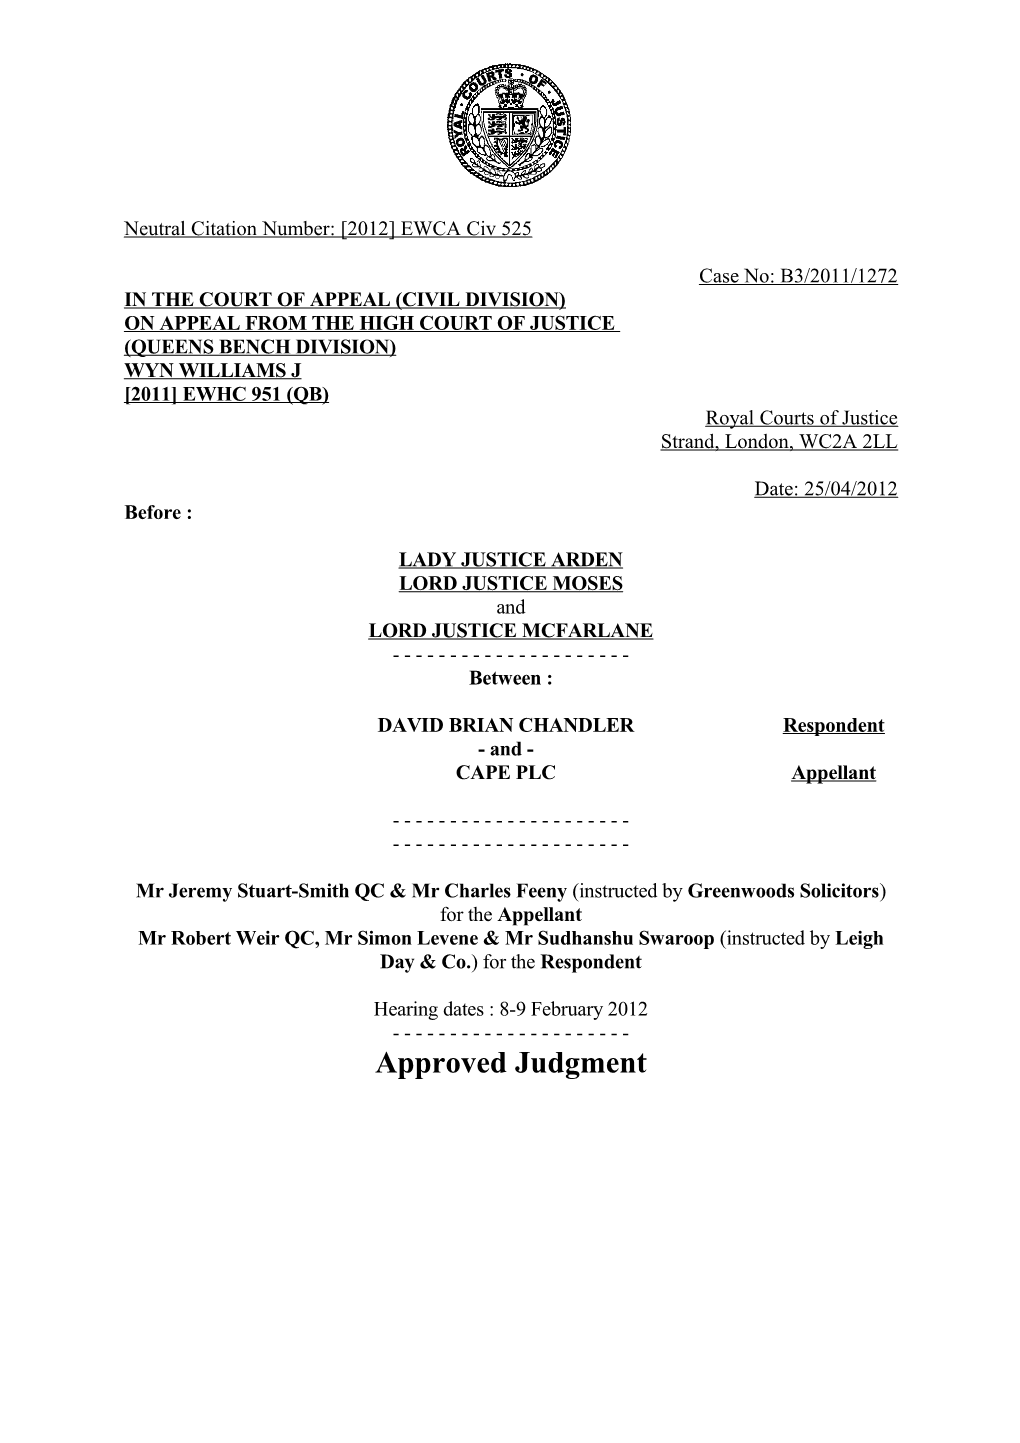 Court of Appeal Judgment Template s2